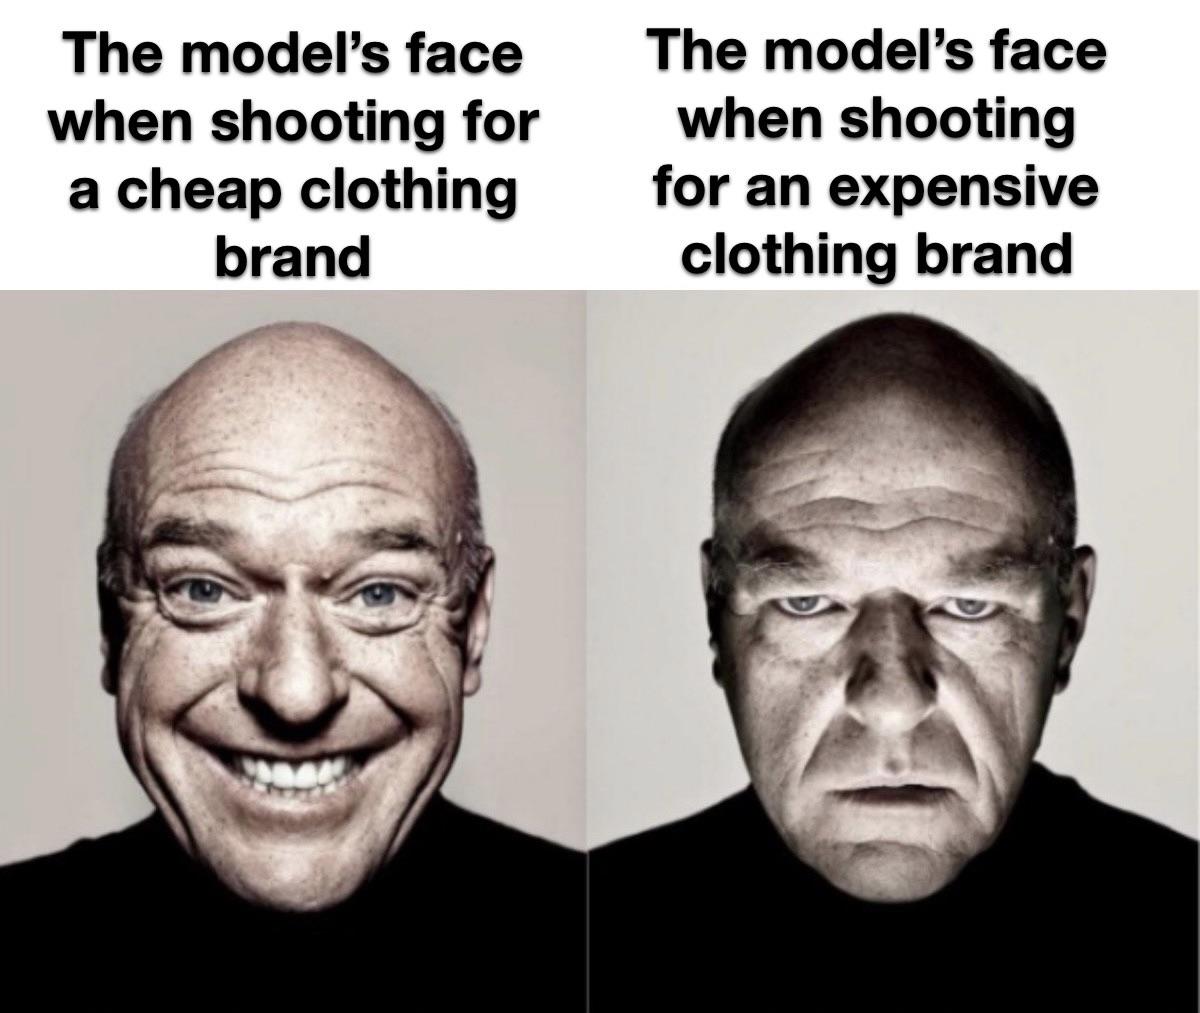 dank memes -  breaking bad memes - The model's face when shooting for a cheap clothing brand year The model's face when shooting for an expensive clothing brand